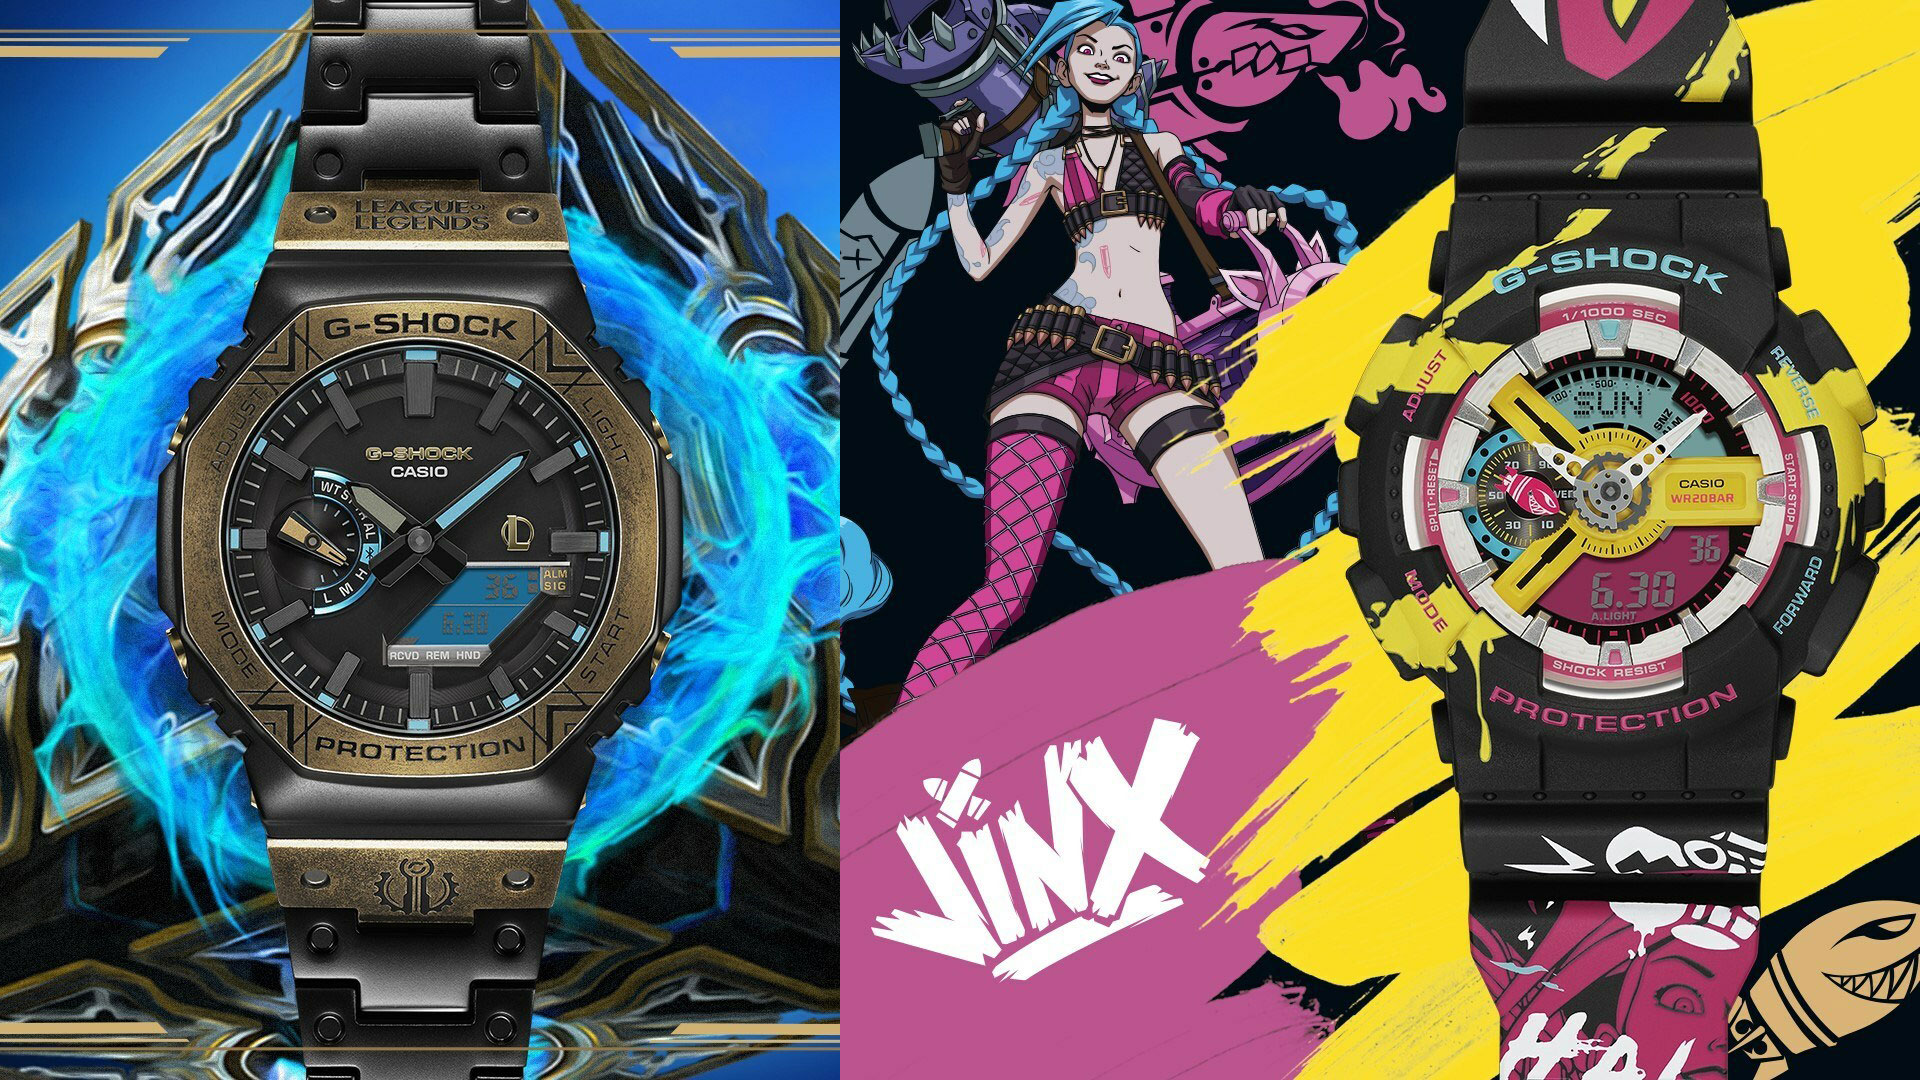 Casio is releasing a pair of League of Legends G-Shock watches